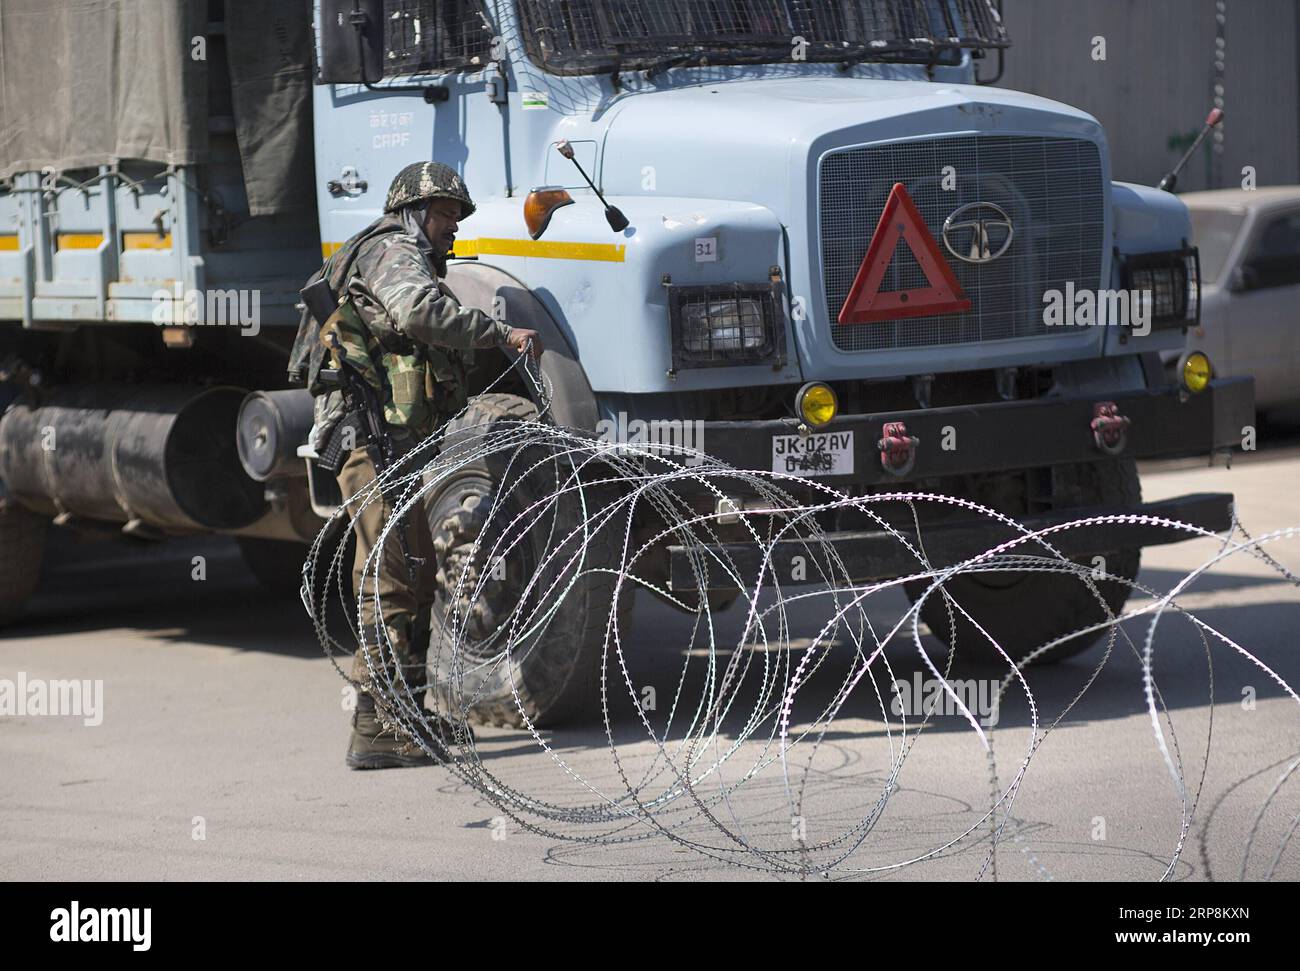 (190310) -- SRINAGAR, March 10, 2019 (Xinhua) -- An Indian paramilitary soldier lays barbed wire on a street during a security lockdown in downtown area of Srinagar, the summer capital of Indian-controlled Kashmir, March 10, 2019. Authorities on Sunday imposed restrictions in parts of Srinagar city to prevent protests after India s anti-terror agency, National Investigation Agency (NIA), summoned key separatist leader and chief cleric of Indian-controlled Kashmir for questioning in an alleged funding case, officials said on Saturday. Mirwaiz Umar Farooq has been asked to appear before the prob Stock Photo